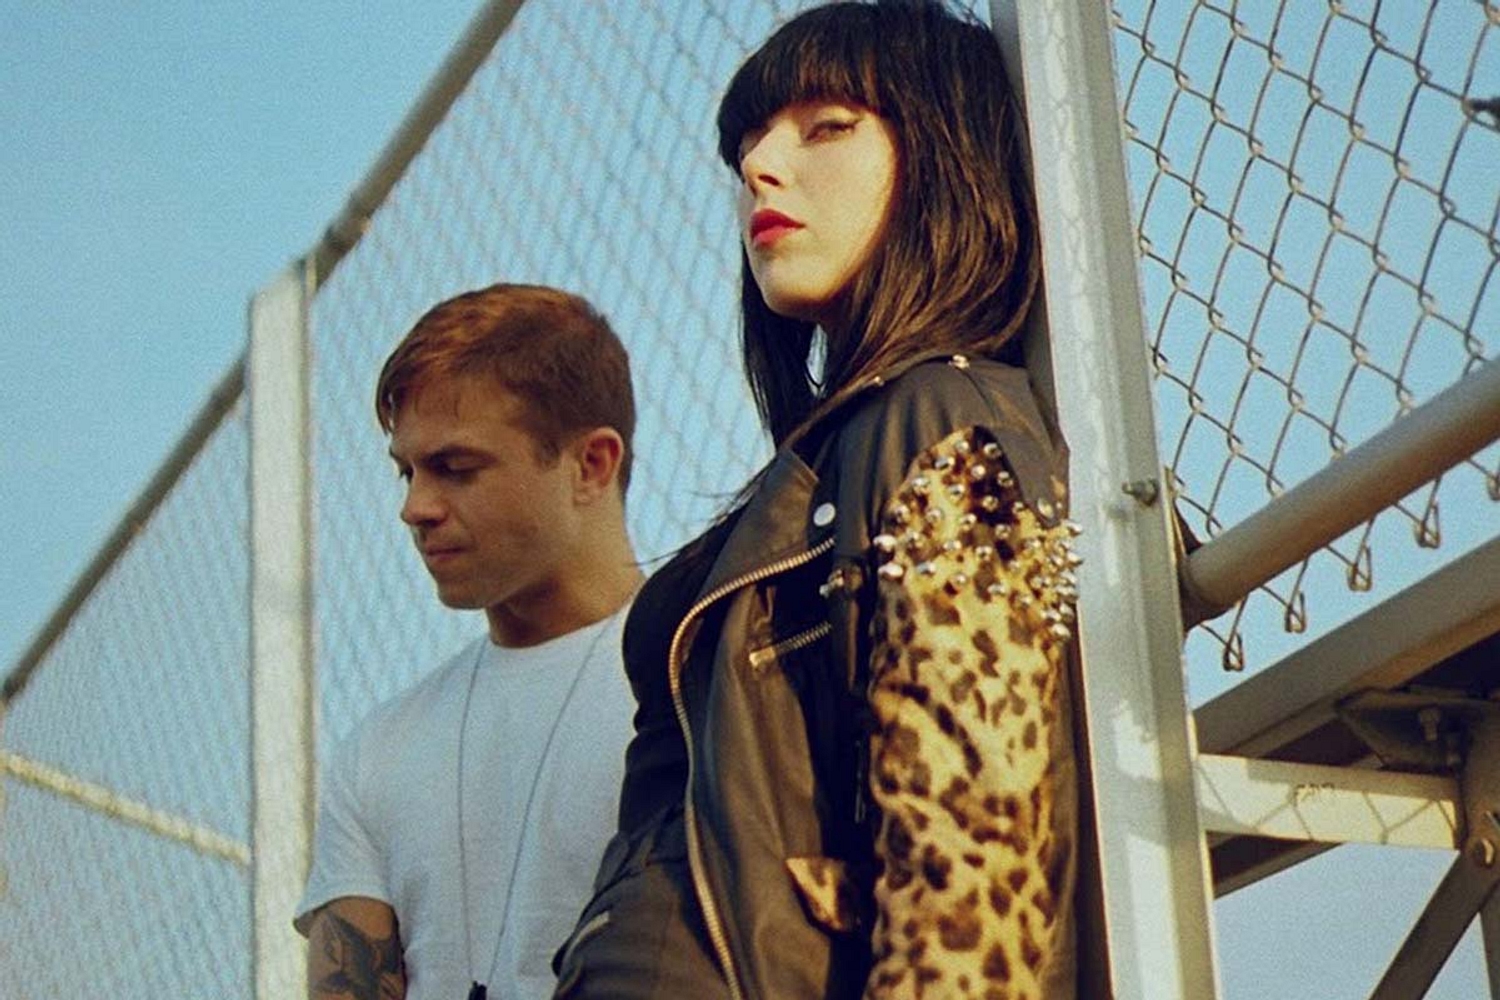 Sleigh Bells - It's Just Us Now